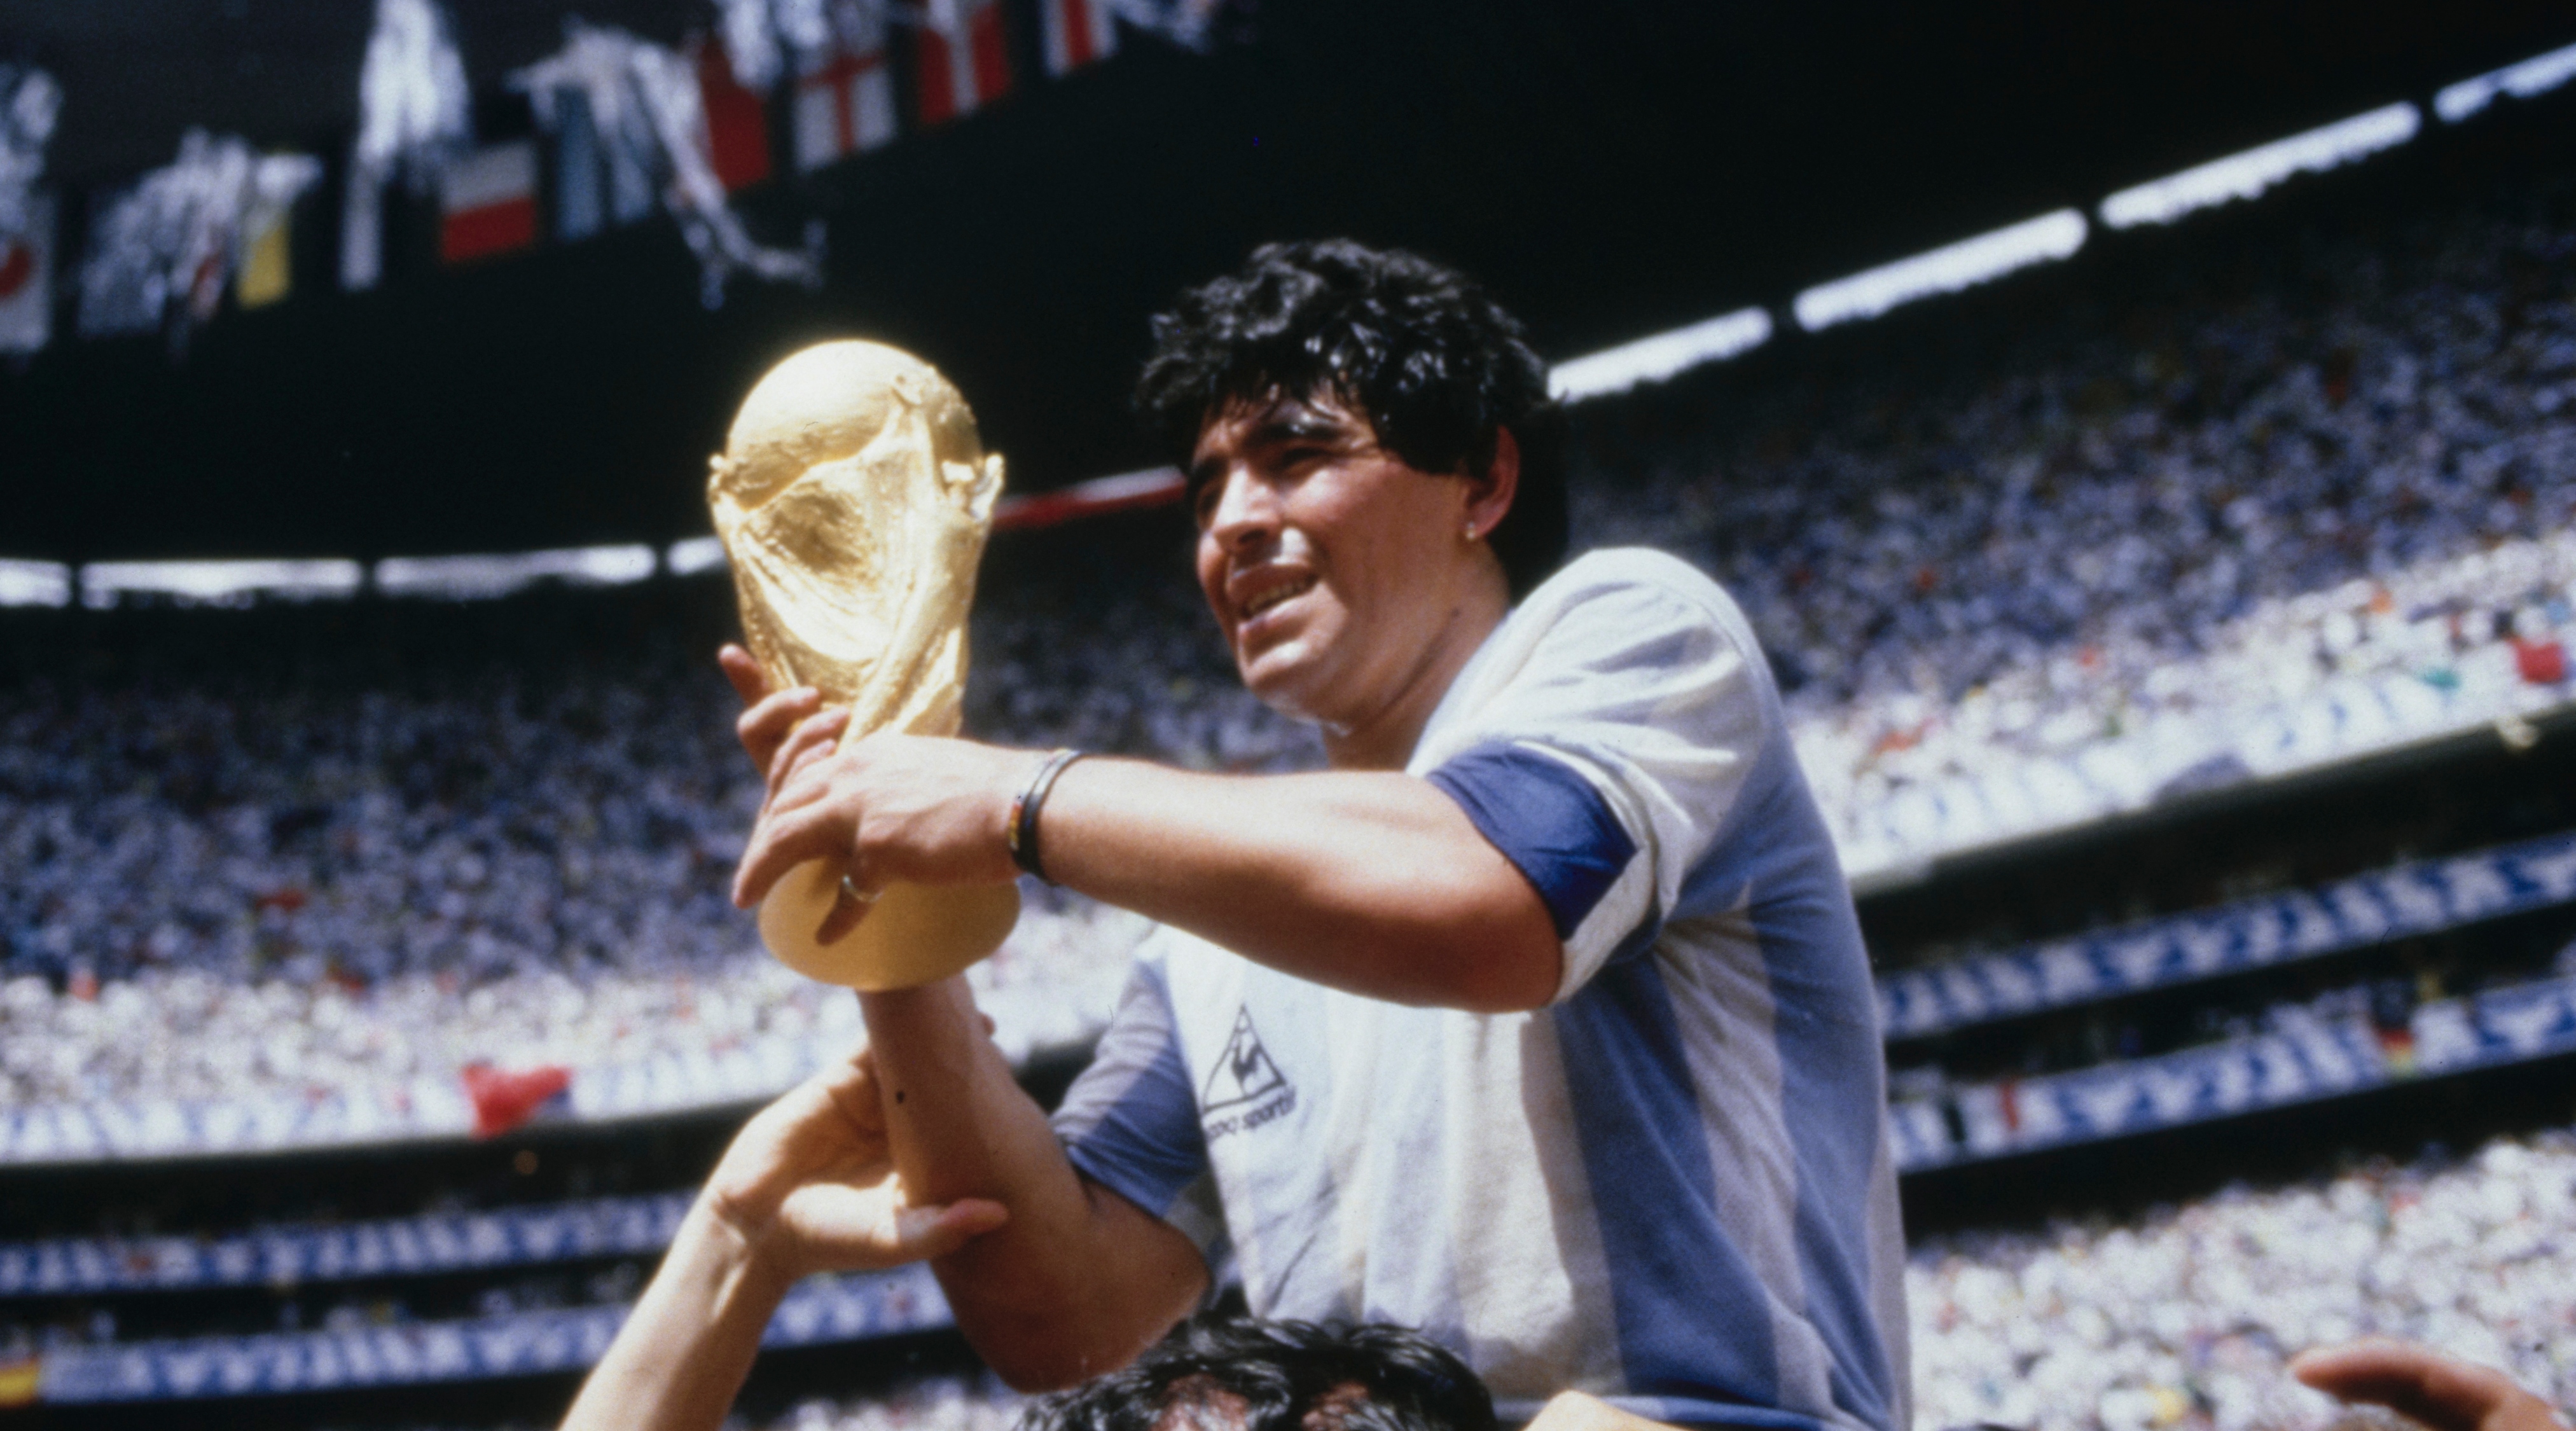 Argentina's Diego Maradona holds the World Cup trophy after Argentina defeated West Germany in the final to win the 1986 FIFA World Cup in Mexico